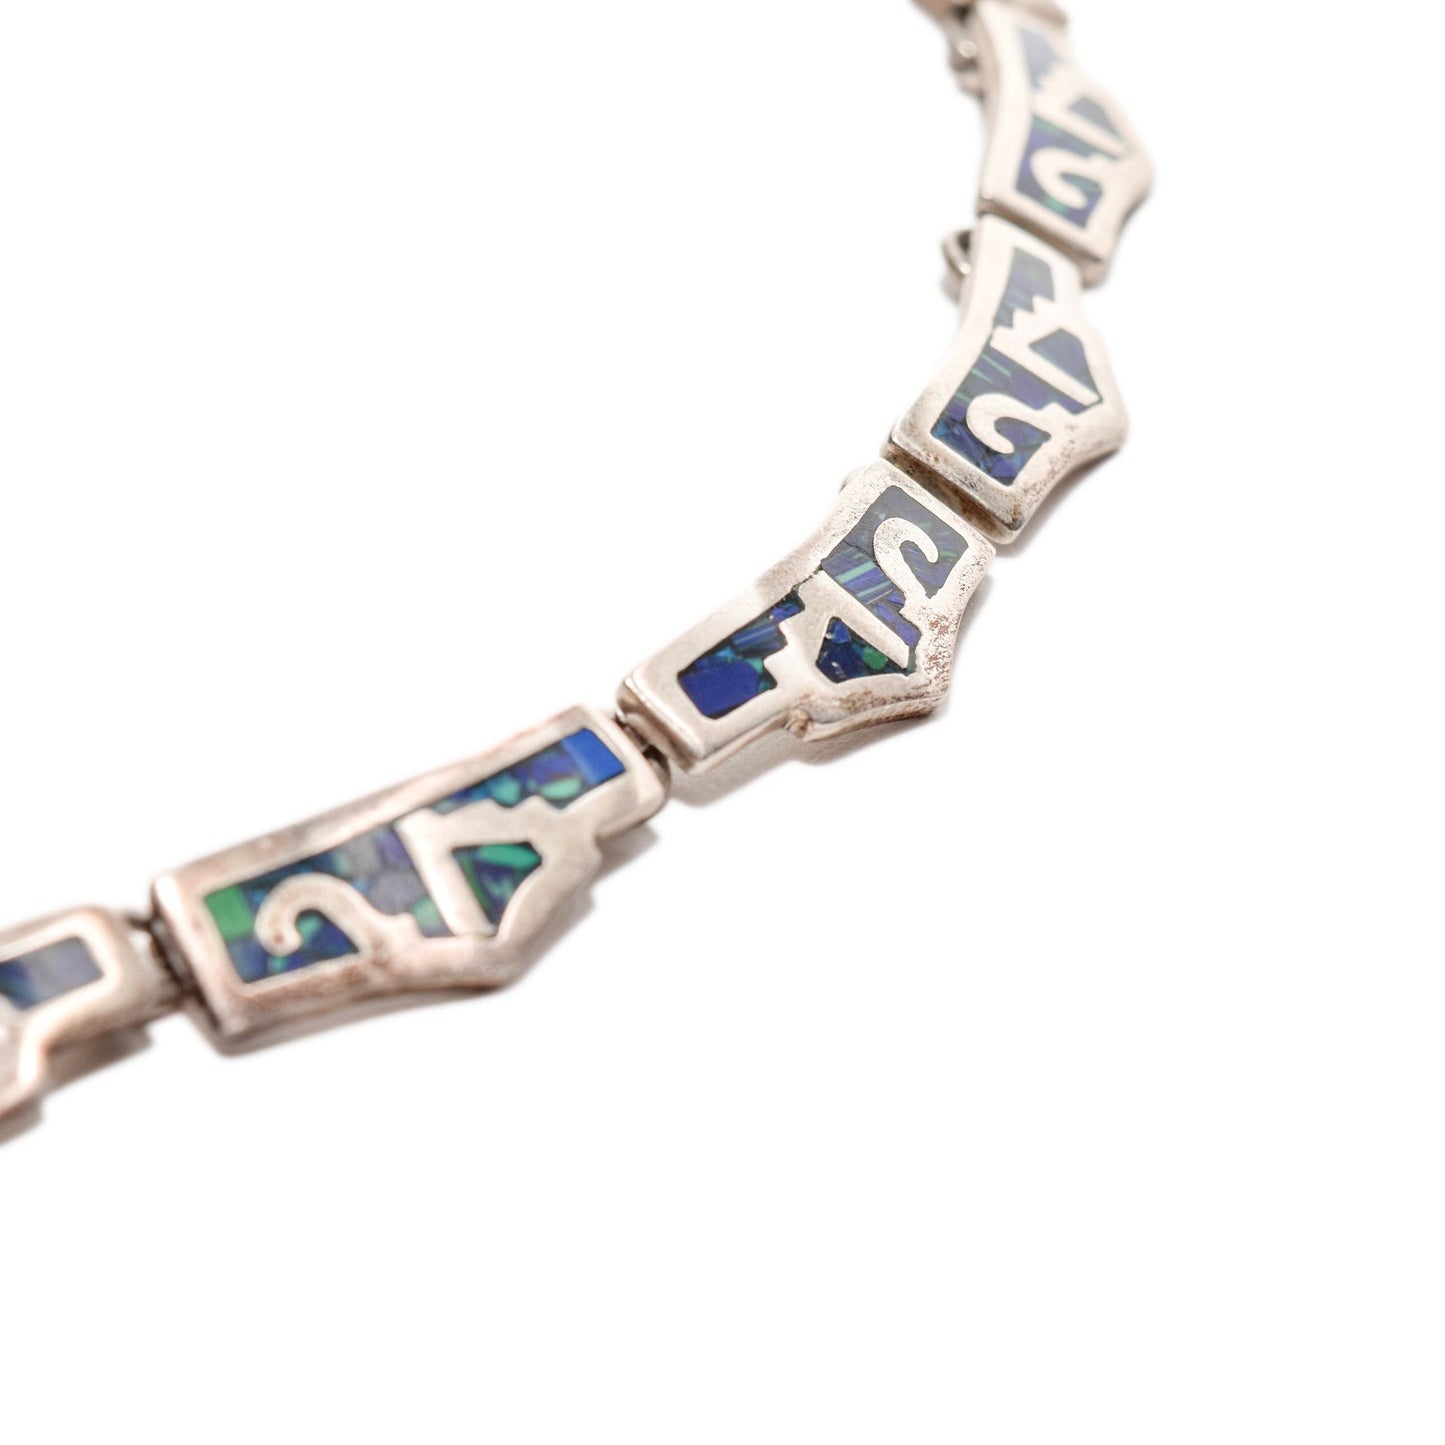 Modernist TAXCO sterling silver collar necklace with blue and green mosaic tribal design, 17.5 inches in length against a white background.